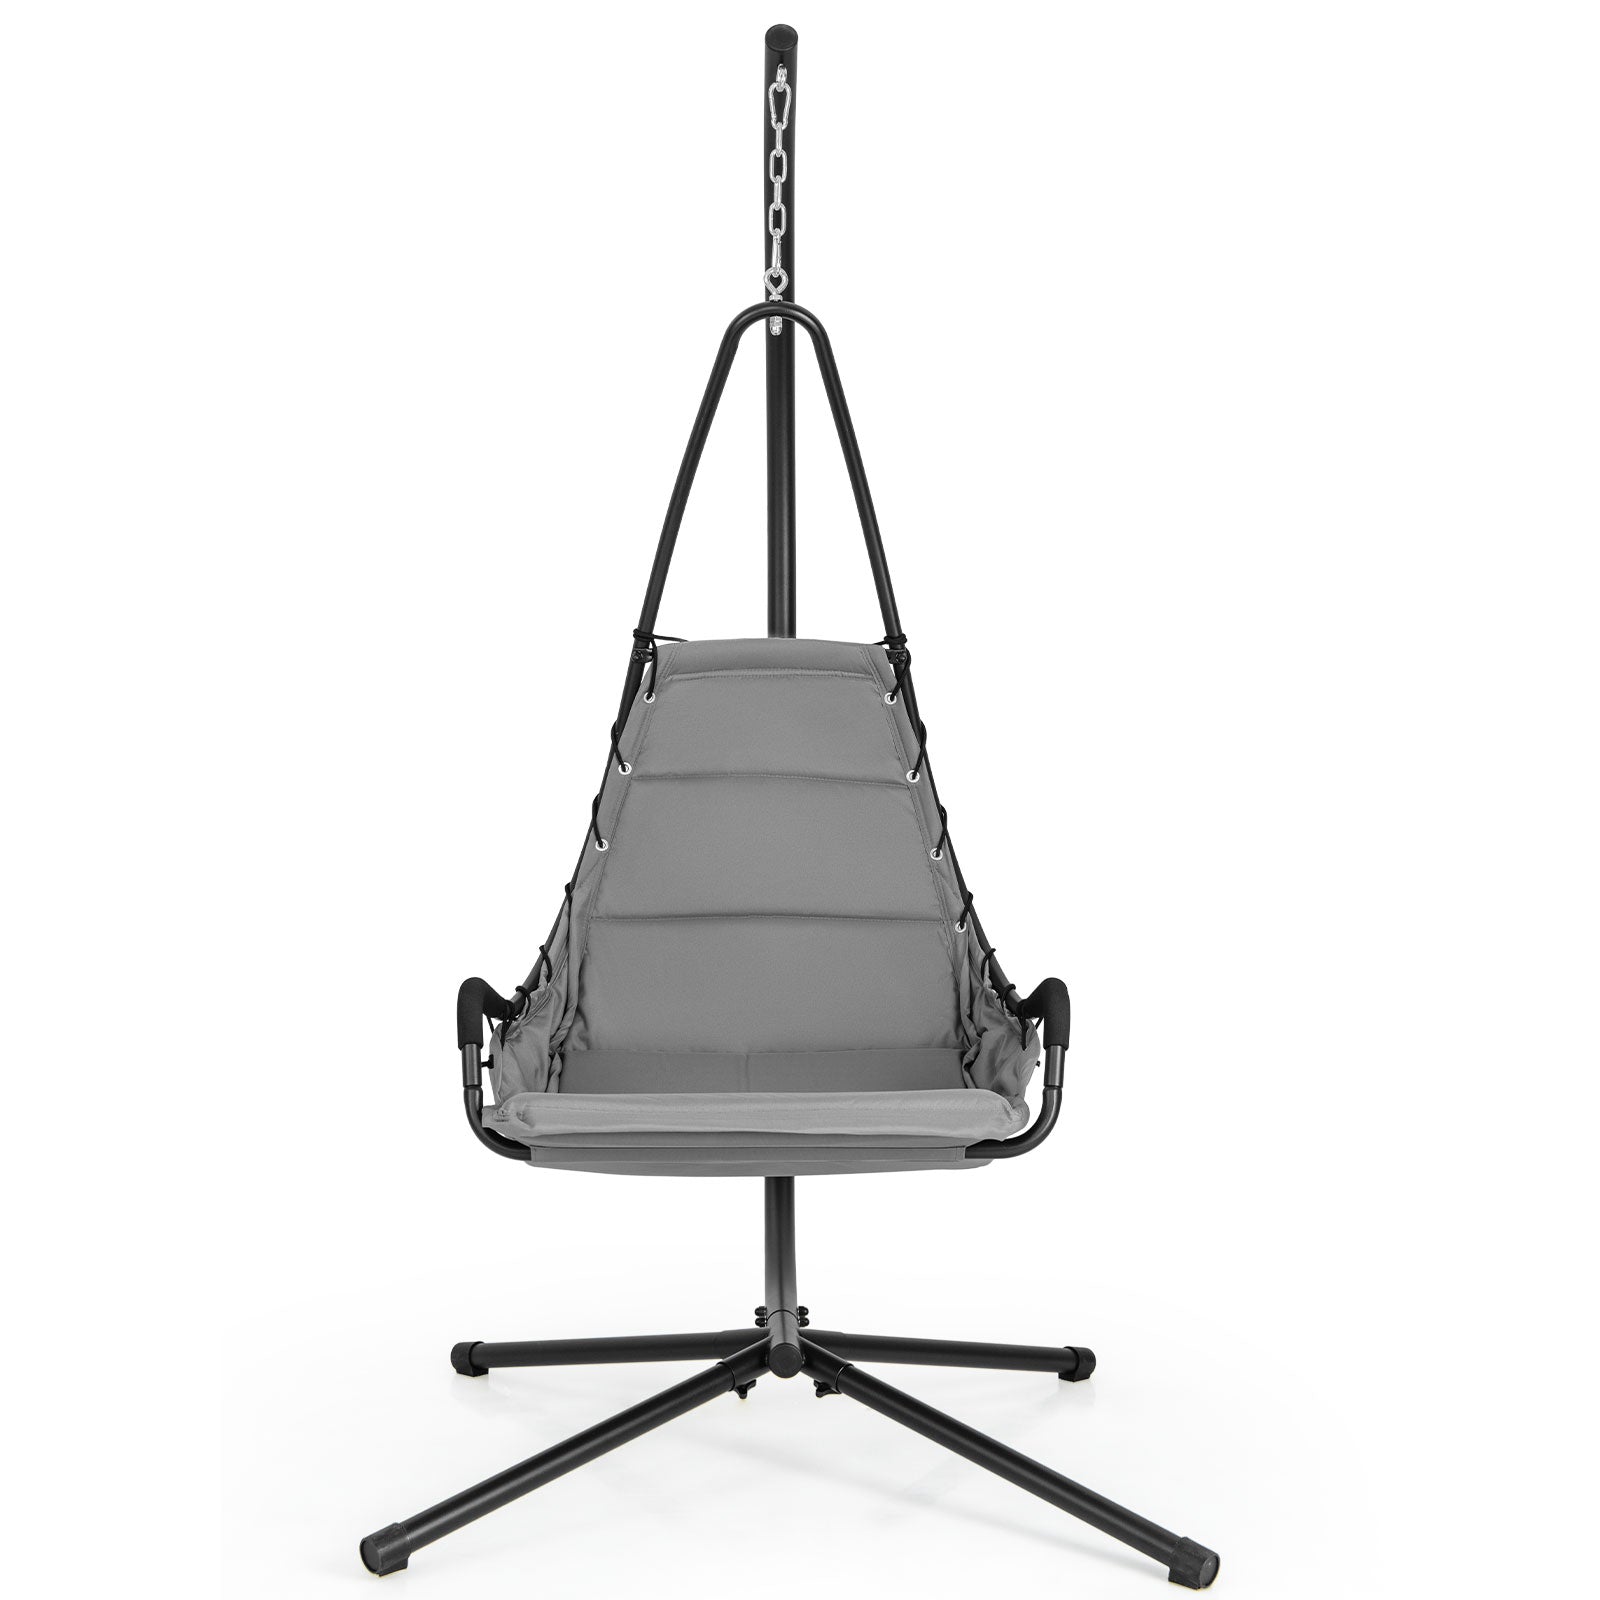 Hammock Swing Chair with Extra Large Padded Seat-Grey